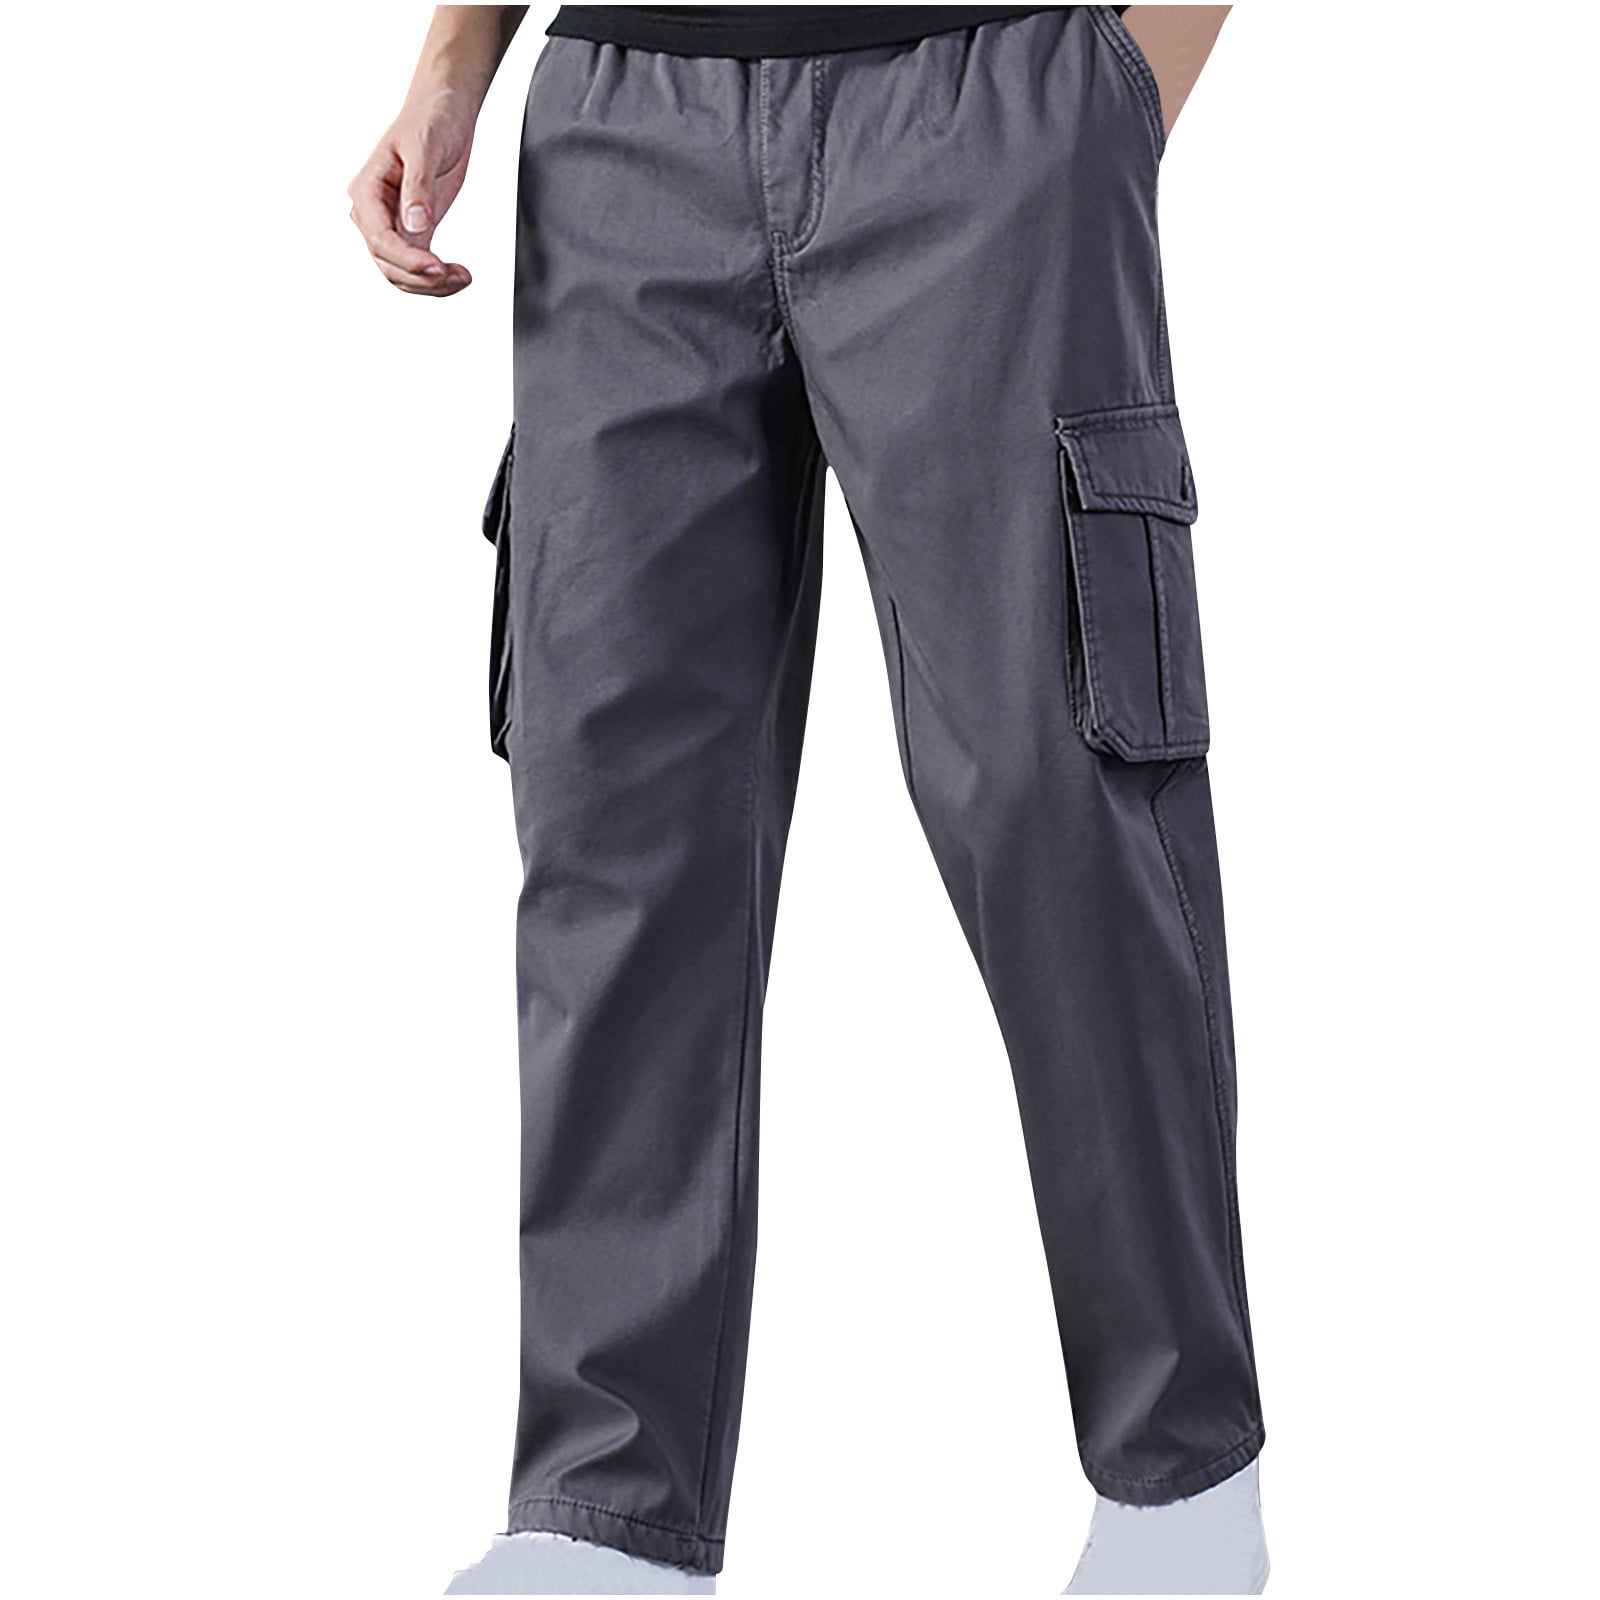 Clearance RYRJJ Mens Fashion Cargo Pants with Multi-Pockets Casual Cotton  Tapered Stretch Twill Drawstring Athletic Joggers Sweatpants(Black,S) 